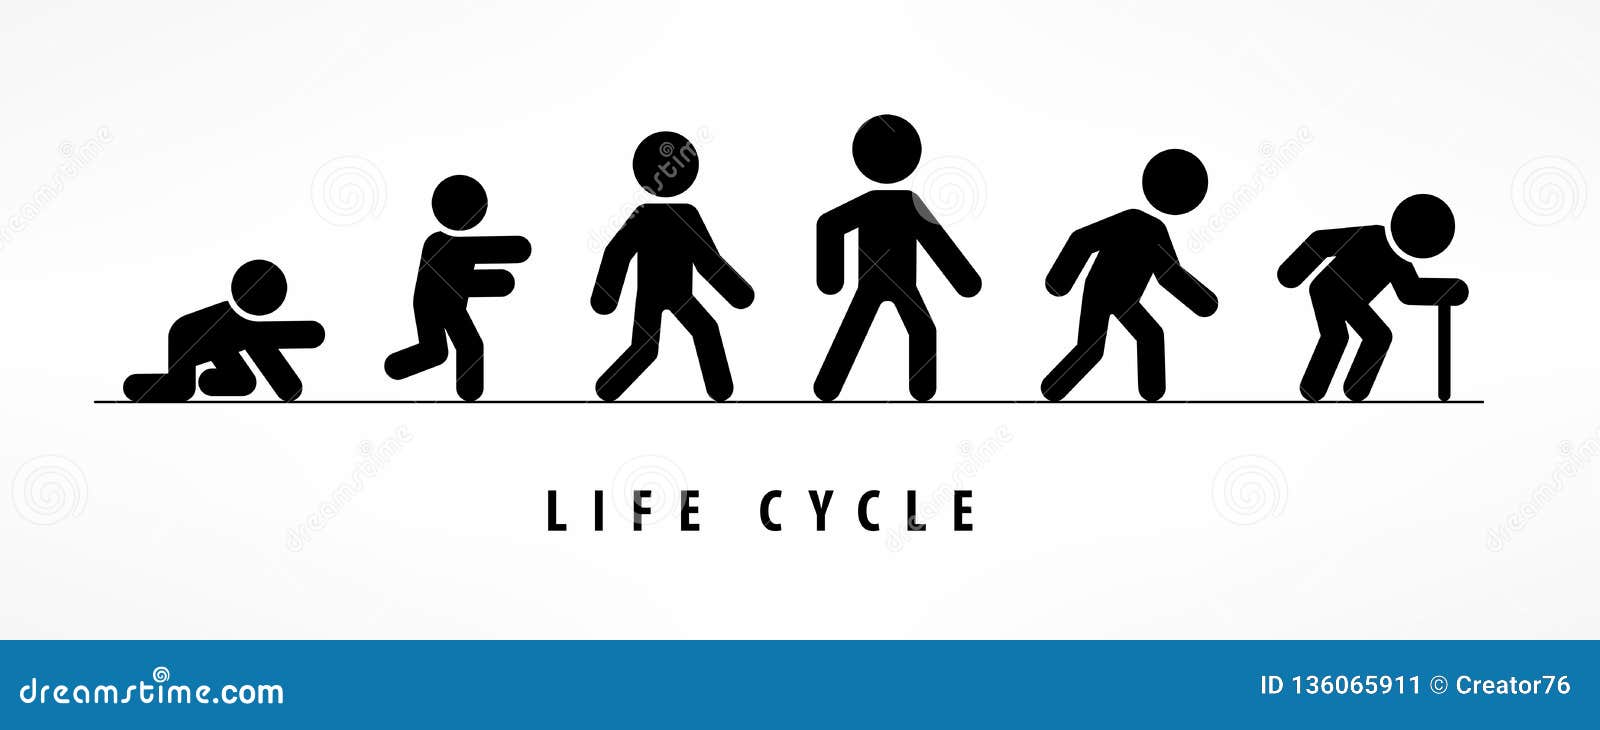 Life cycles of man stages growing up from baby Vector Image